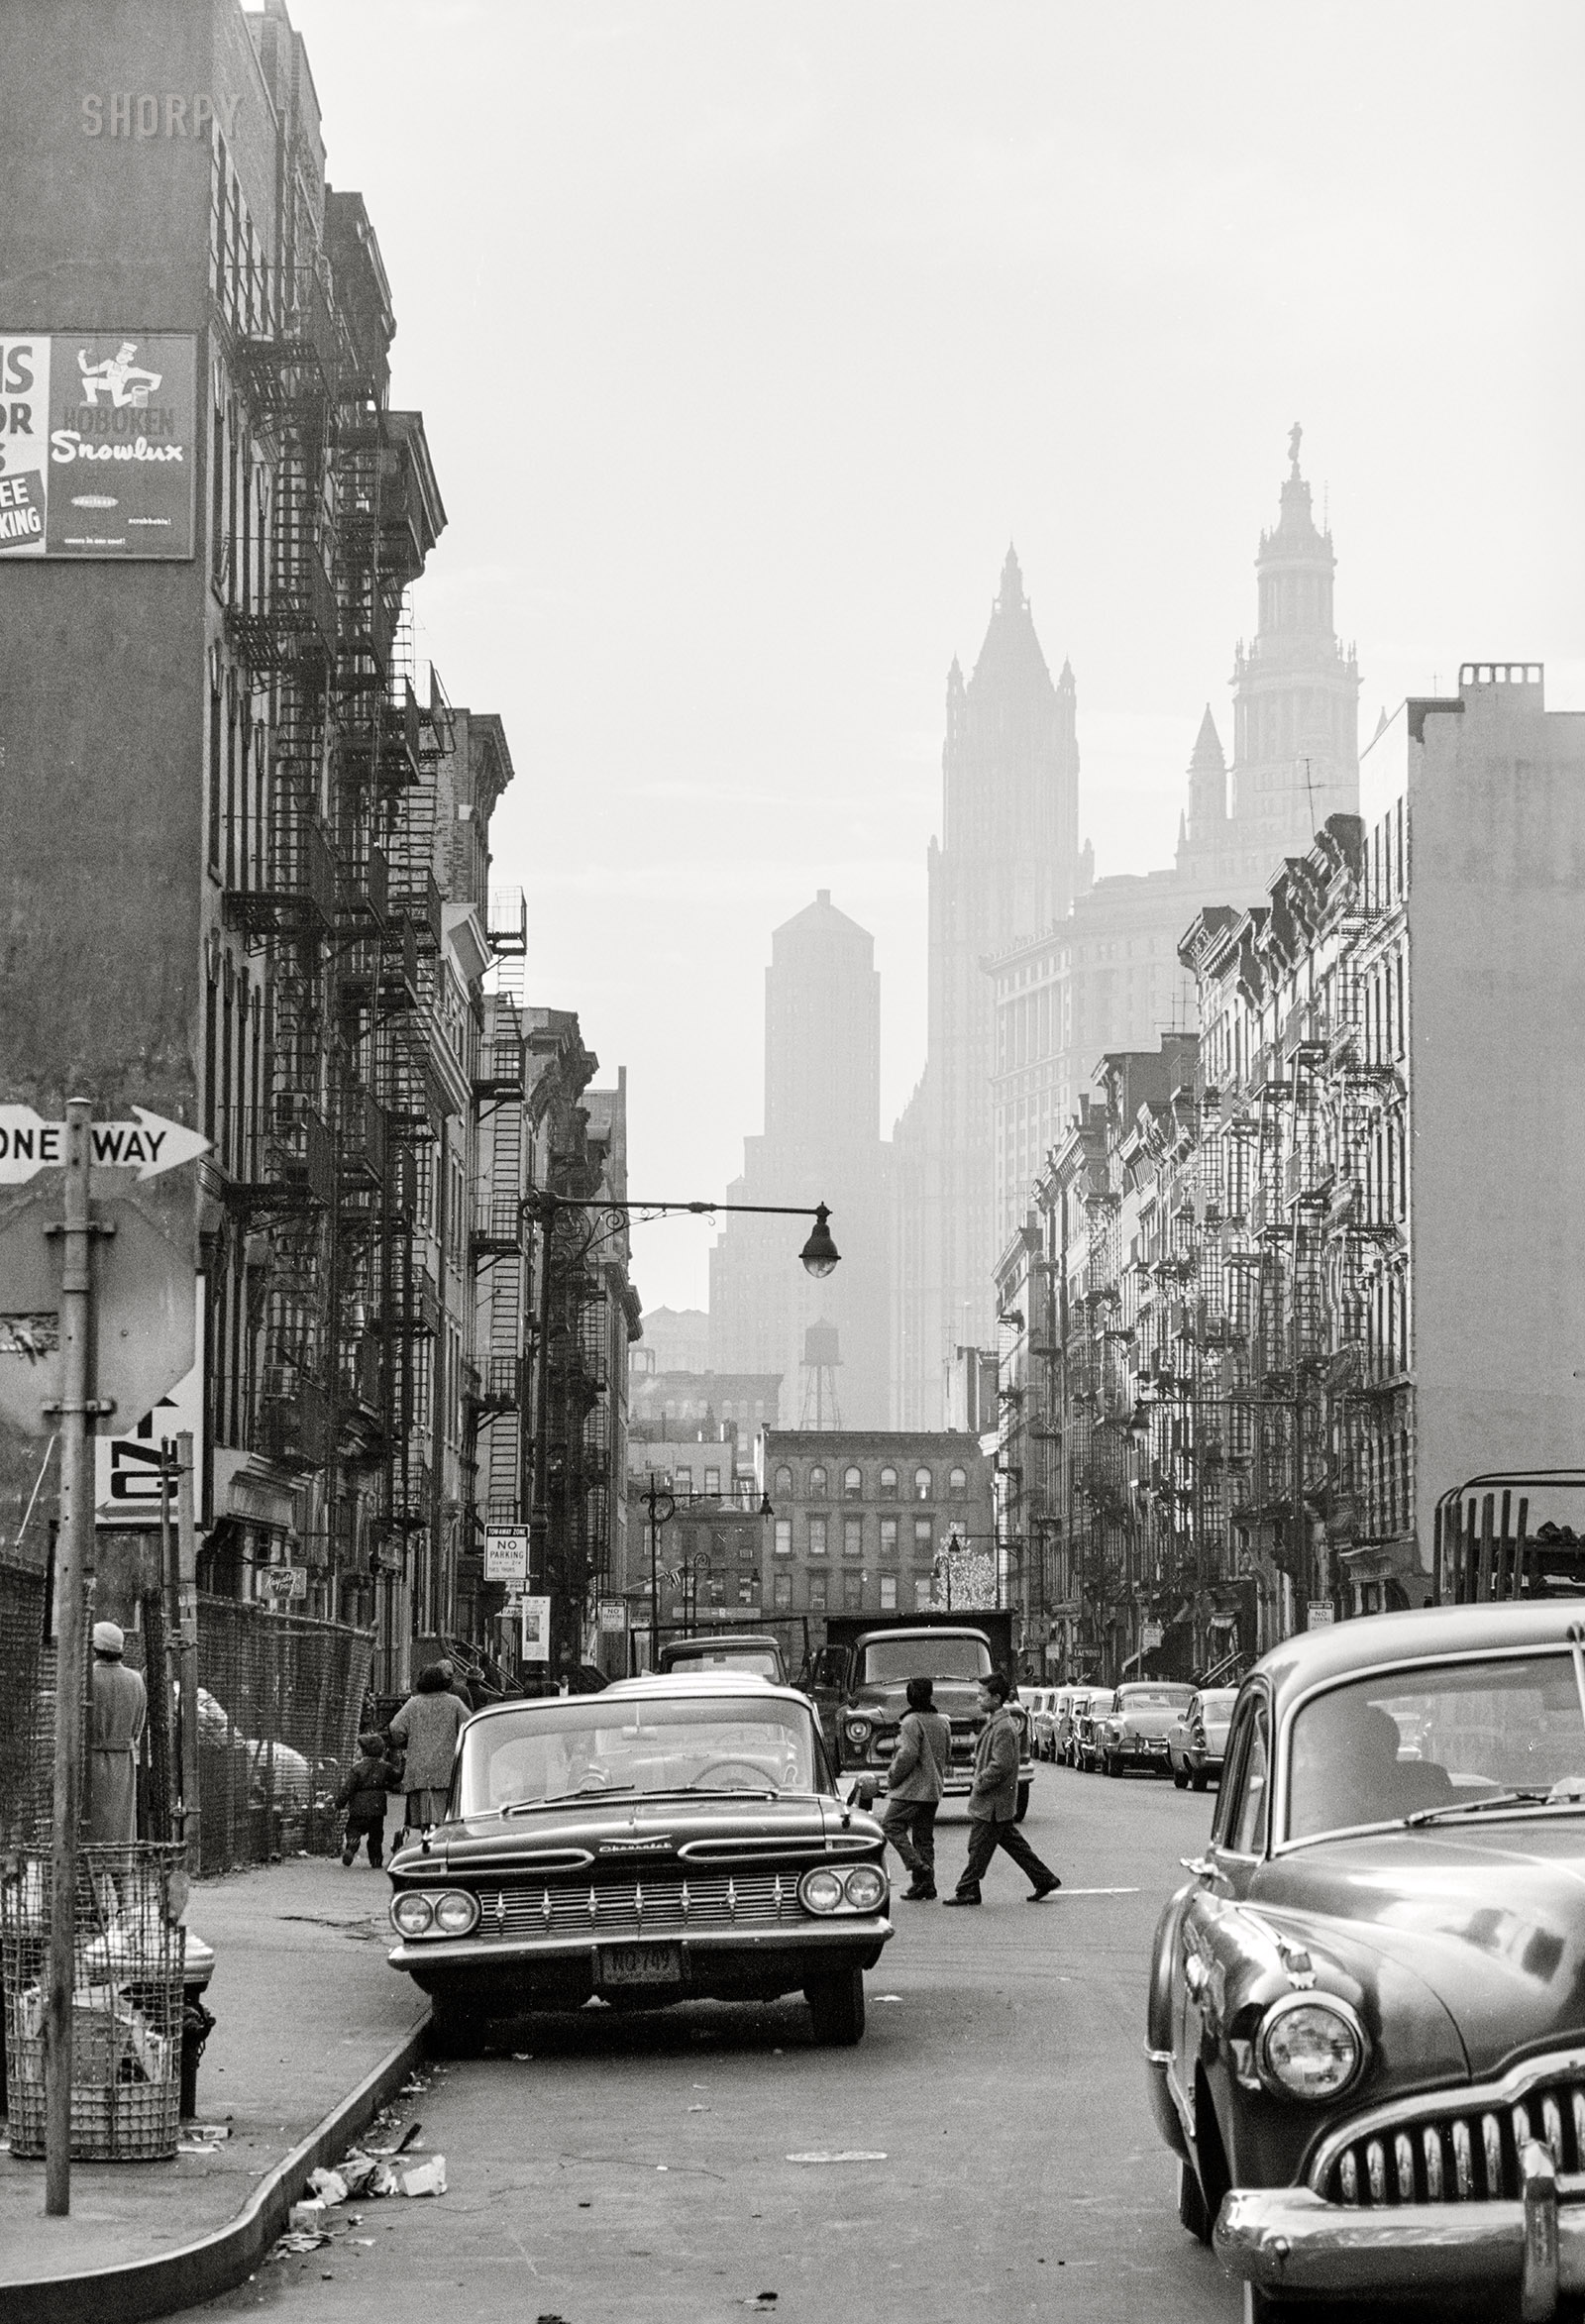 November 4, 1959. "People and cars, Essex Street and Henry Street, Lower East Side, New York City." 35mm acetate negative by Marion Trikosko for the U.S. News & World Report assignment "Puerto Rican Story N.Y.C." USN&WR Collection, Library of Congress. View full size.